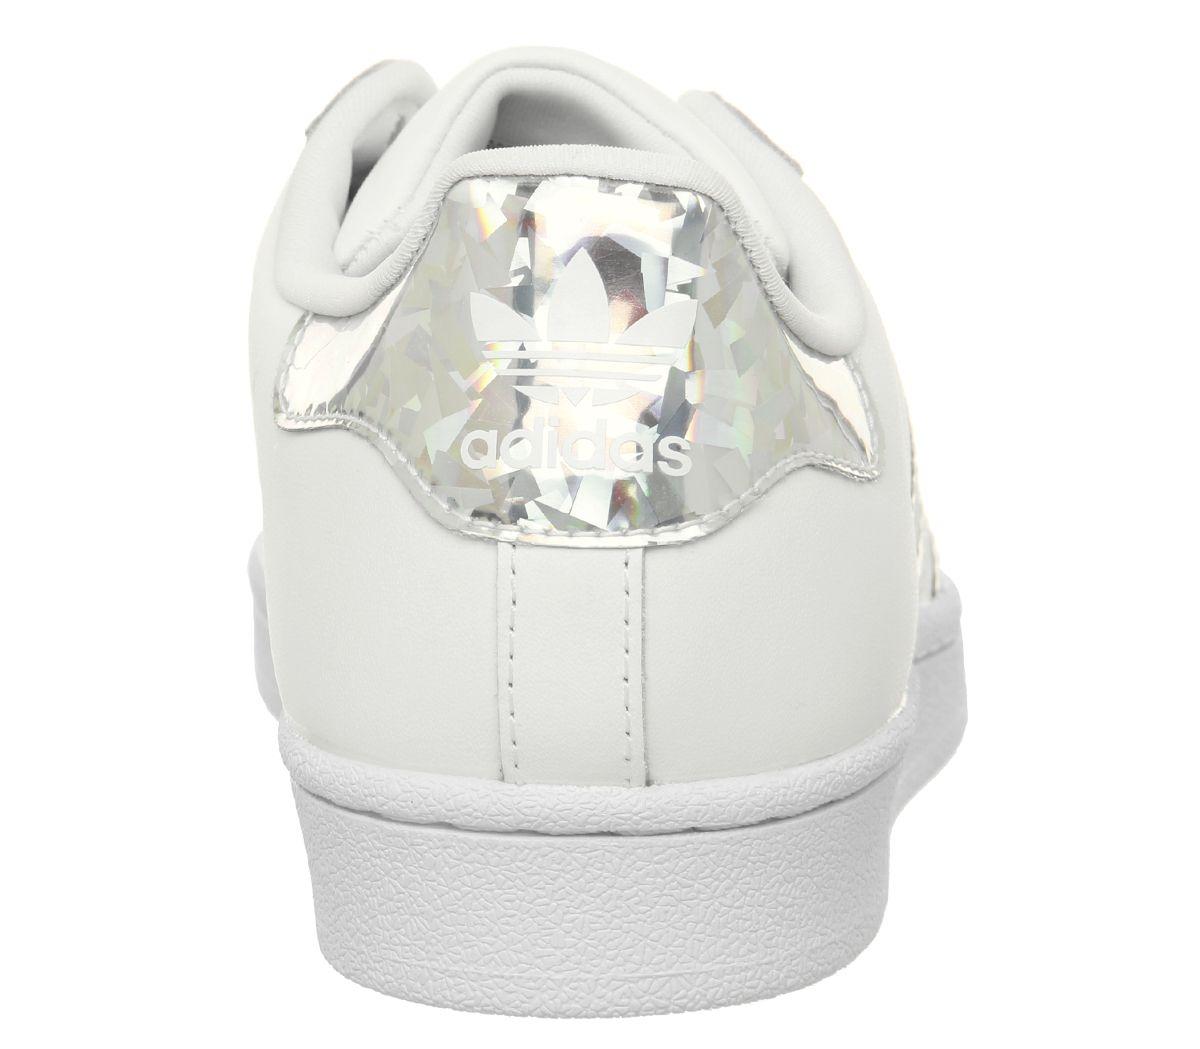 adidas superstar gs white silver holographic